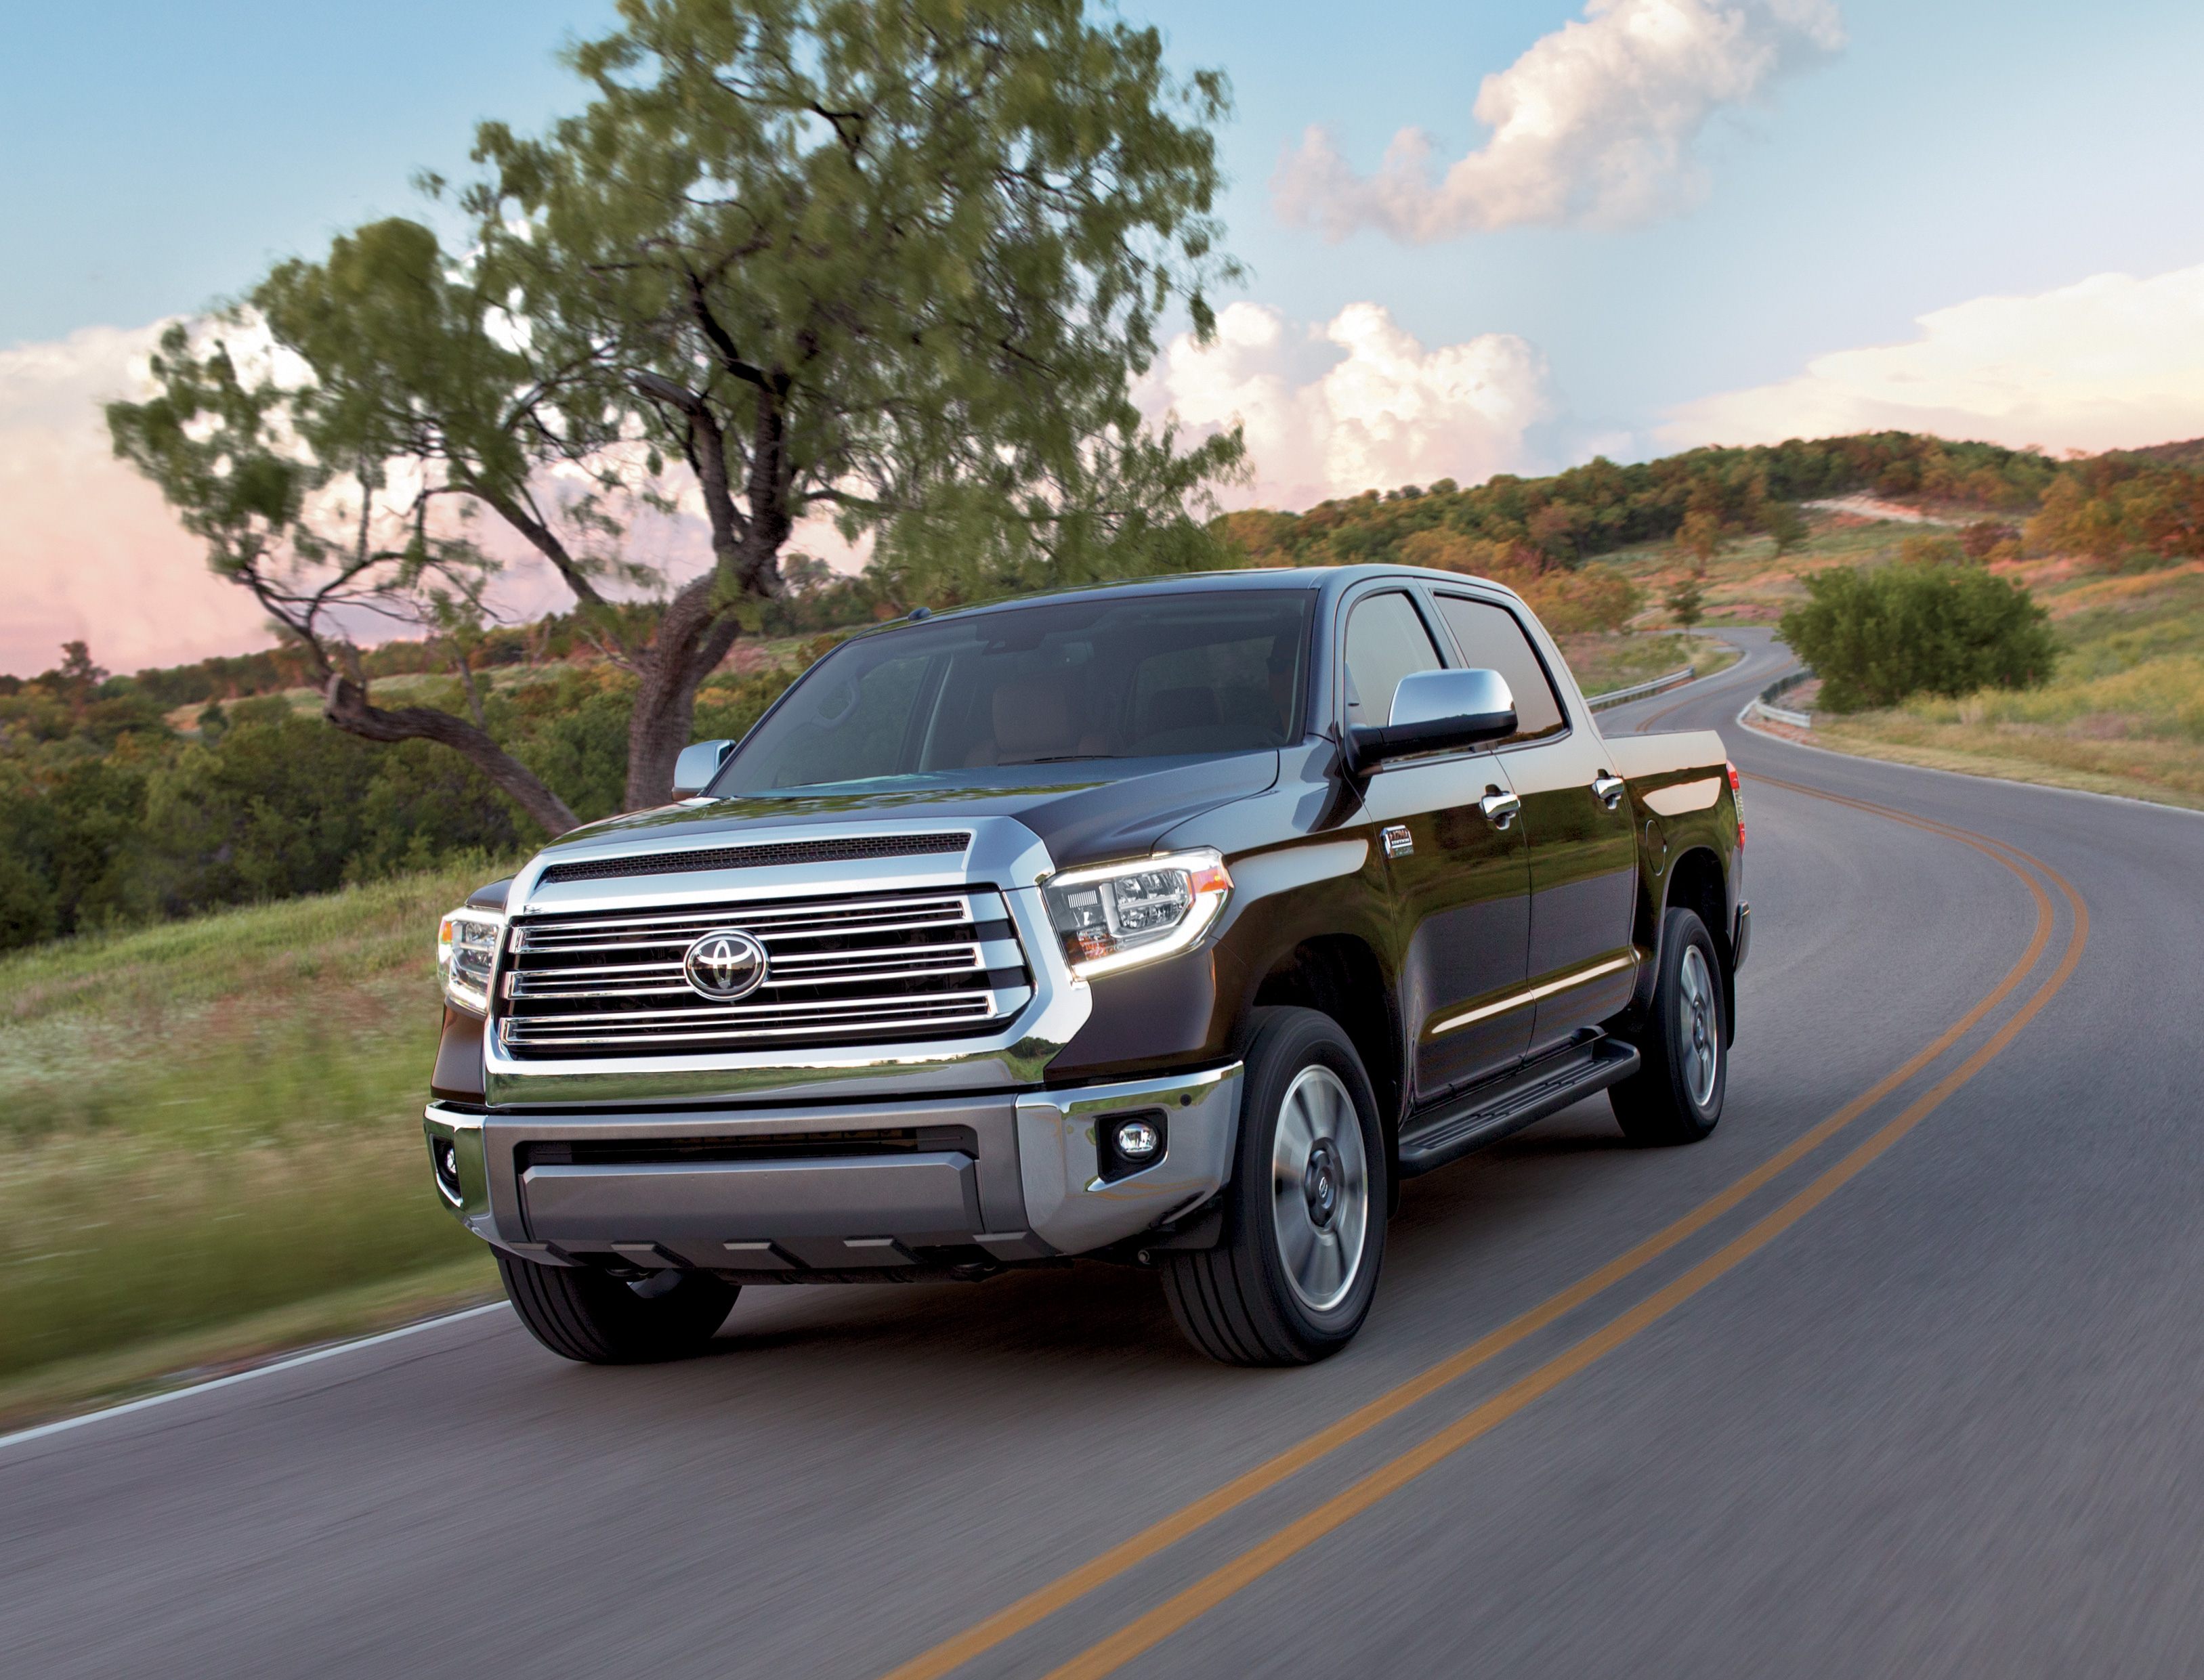 Comment on All-New Toyota Tundra Could Arrive in 2019 with Major Changes by Mike S